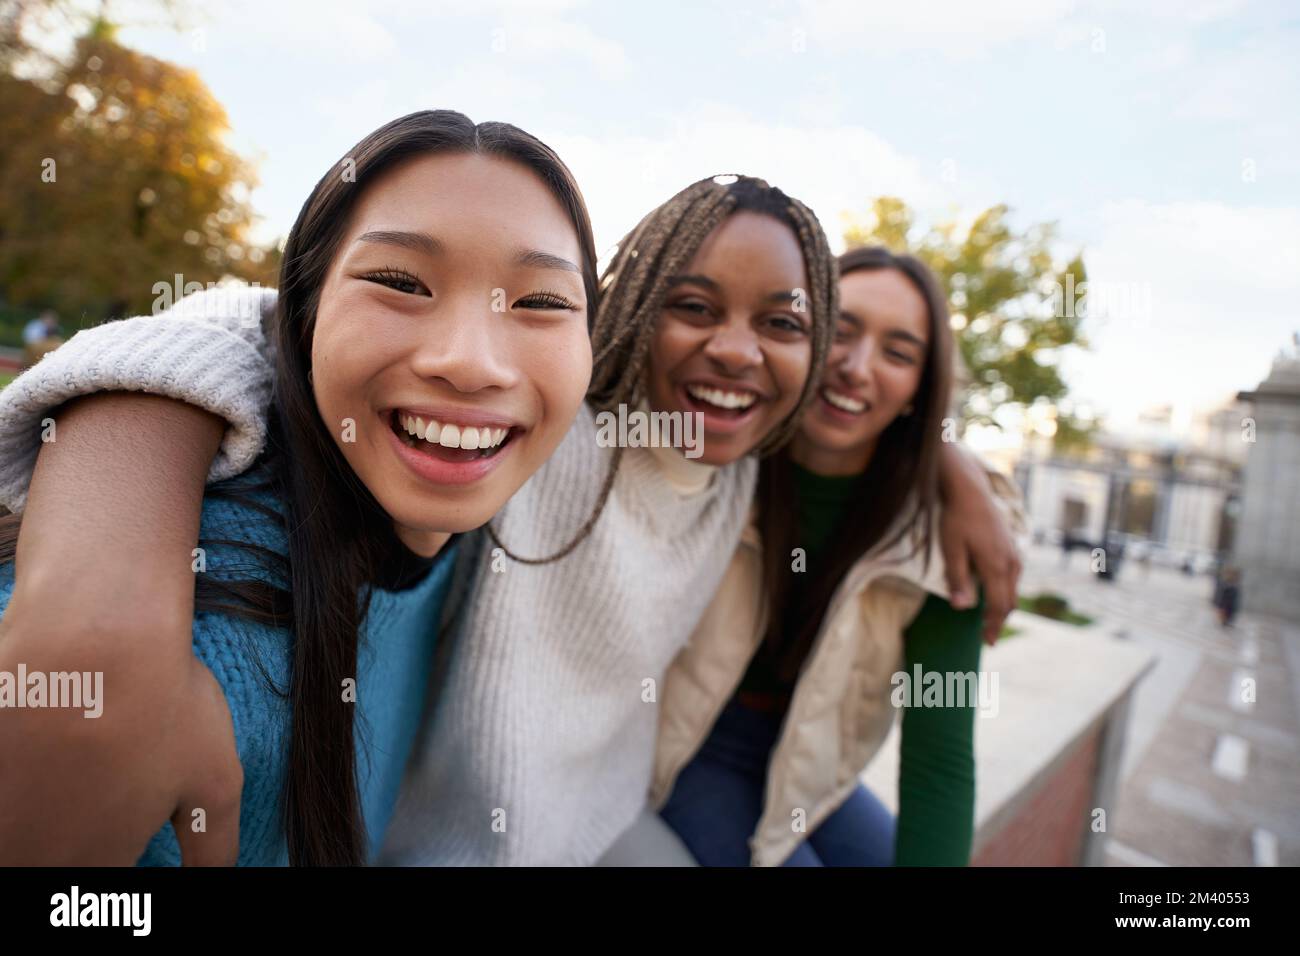 Group of three cheerful female friends looking at the camera hugging each other Happy girls outdoors Stock Photo